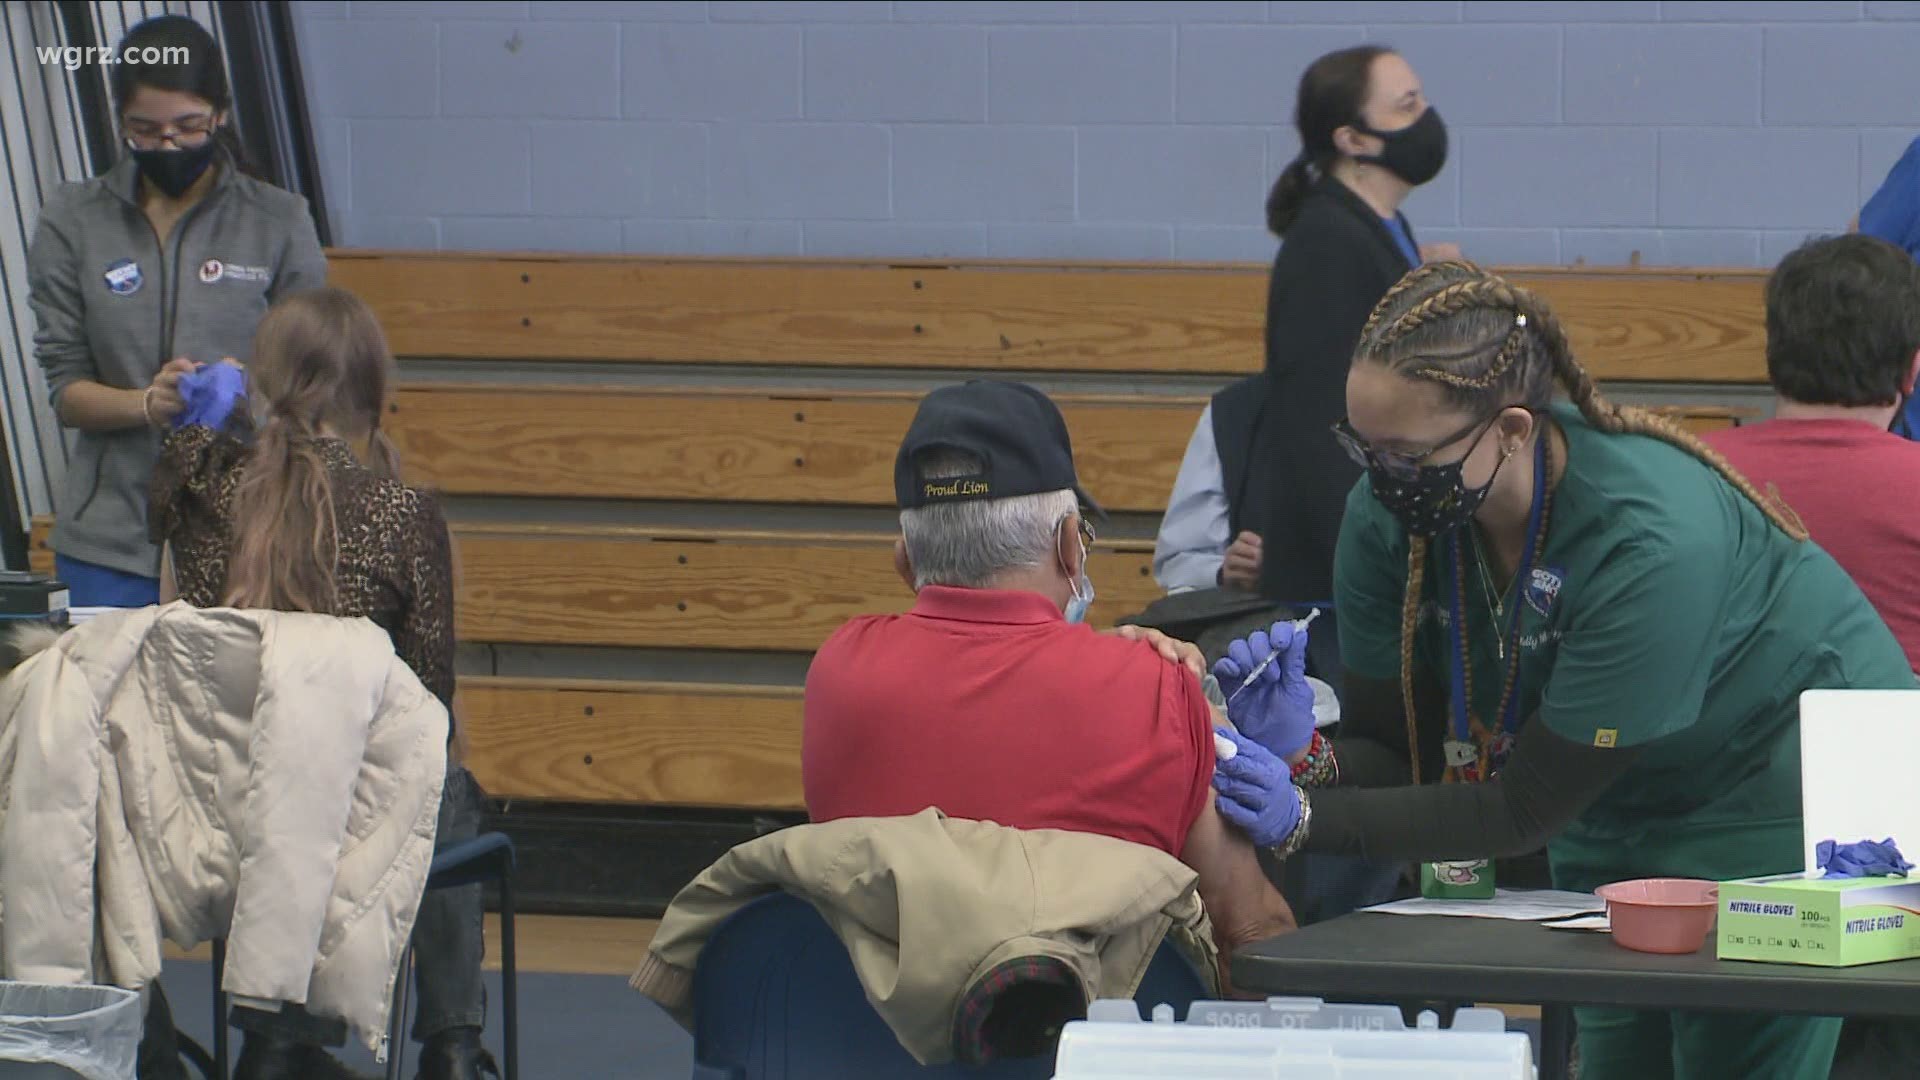 pop-up clinic was at Wrobel Towers in the Falls… where 150 people were vaccinated.